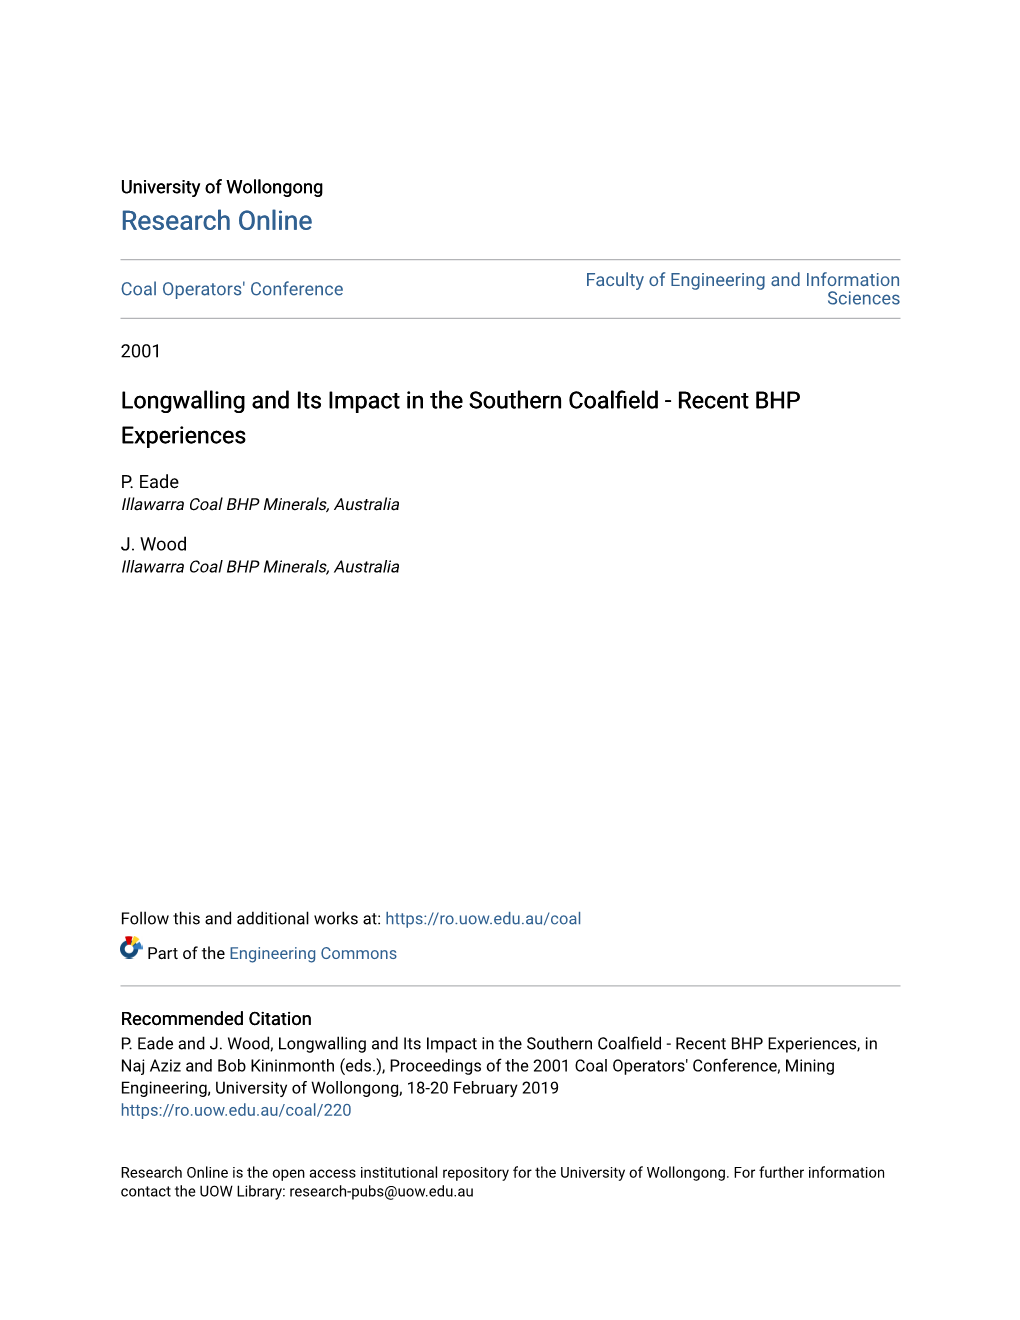 Longwalling and Its Impact in the Southern Coalfield - Recent BHP Experiences